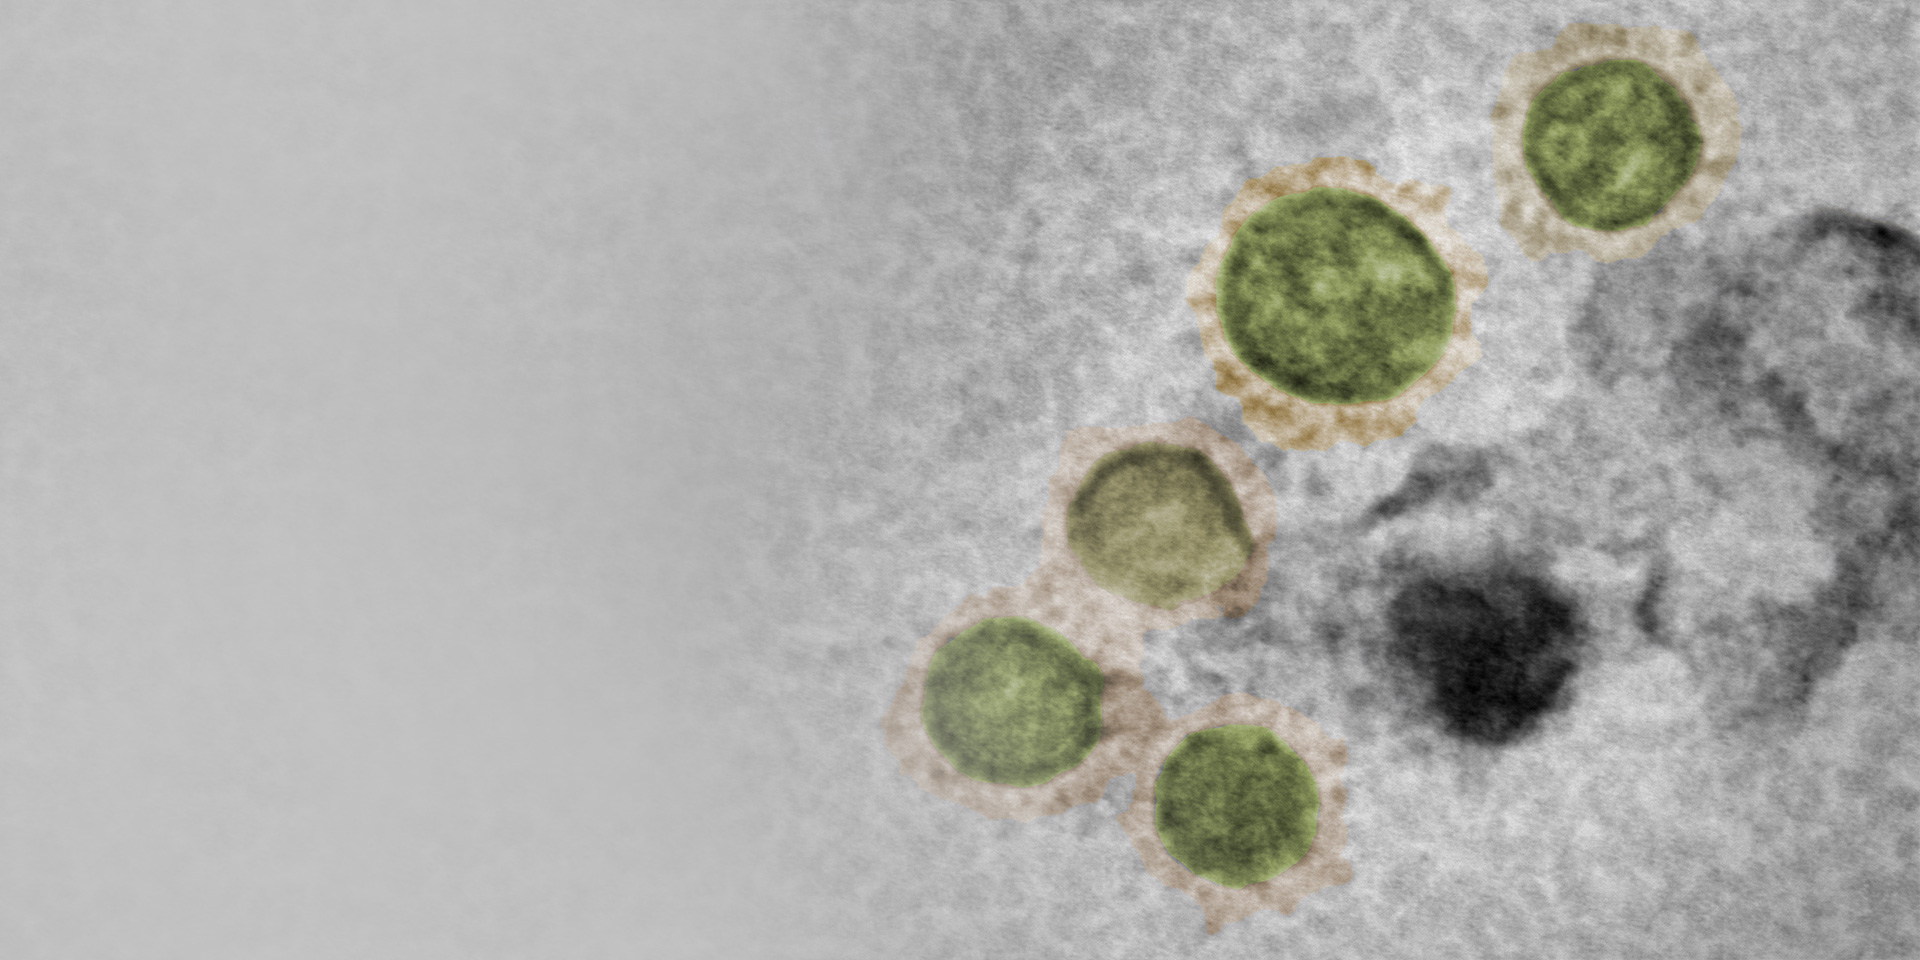 SARS-CoV-2  virus, culture, inactivated, negatively stained, GeminiSEM 560, aSTEM, HAADF/BF. Sample: courtesy of M. Hannah, Public Health England, UK.